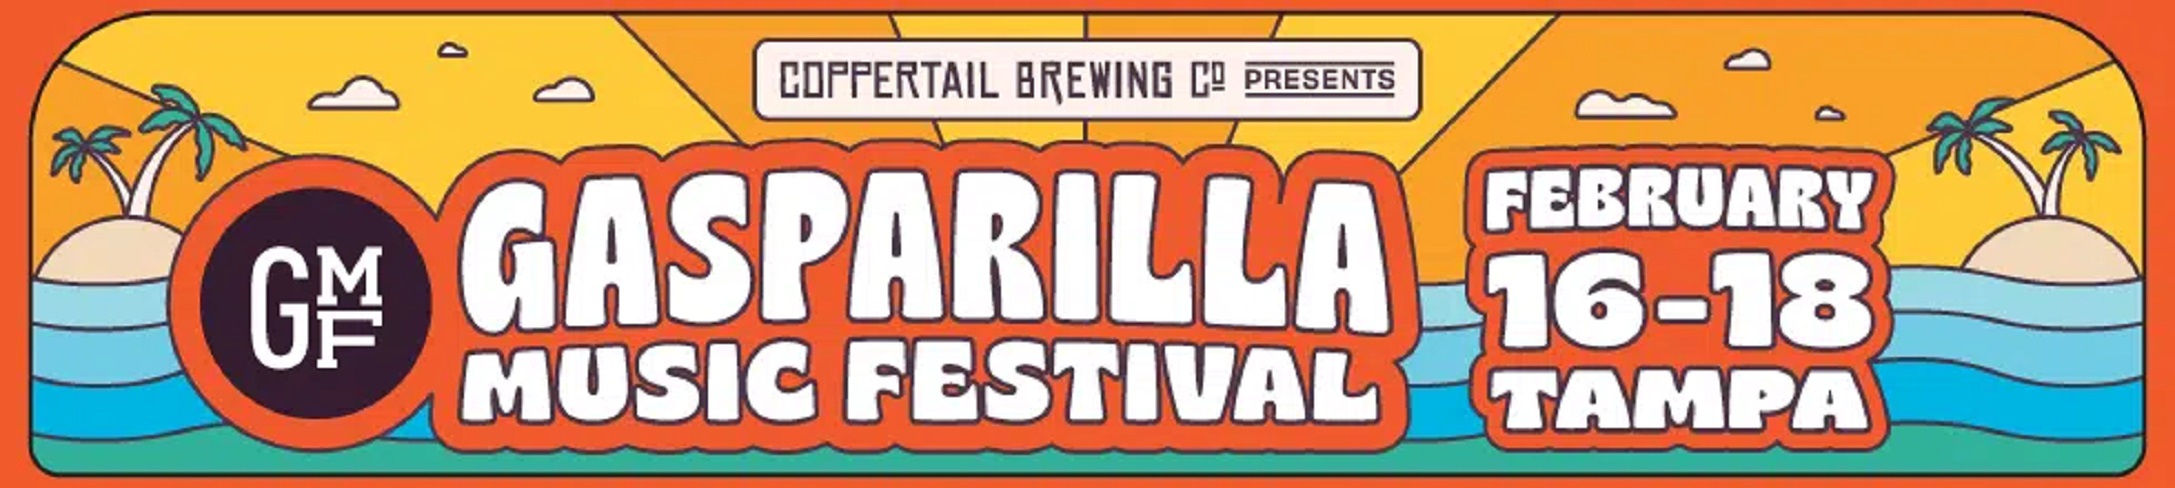 Gasparilla Music Festival Moves to New Venue Early Bird Tickets on Sale Now